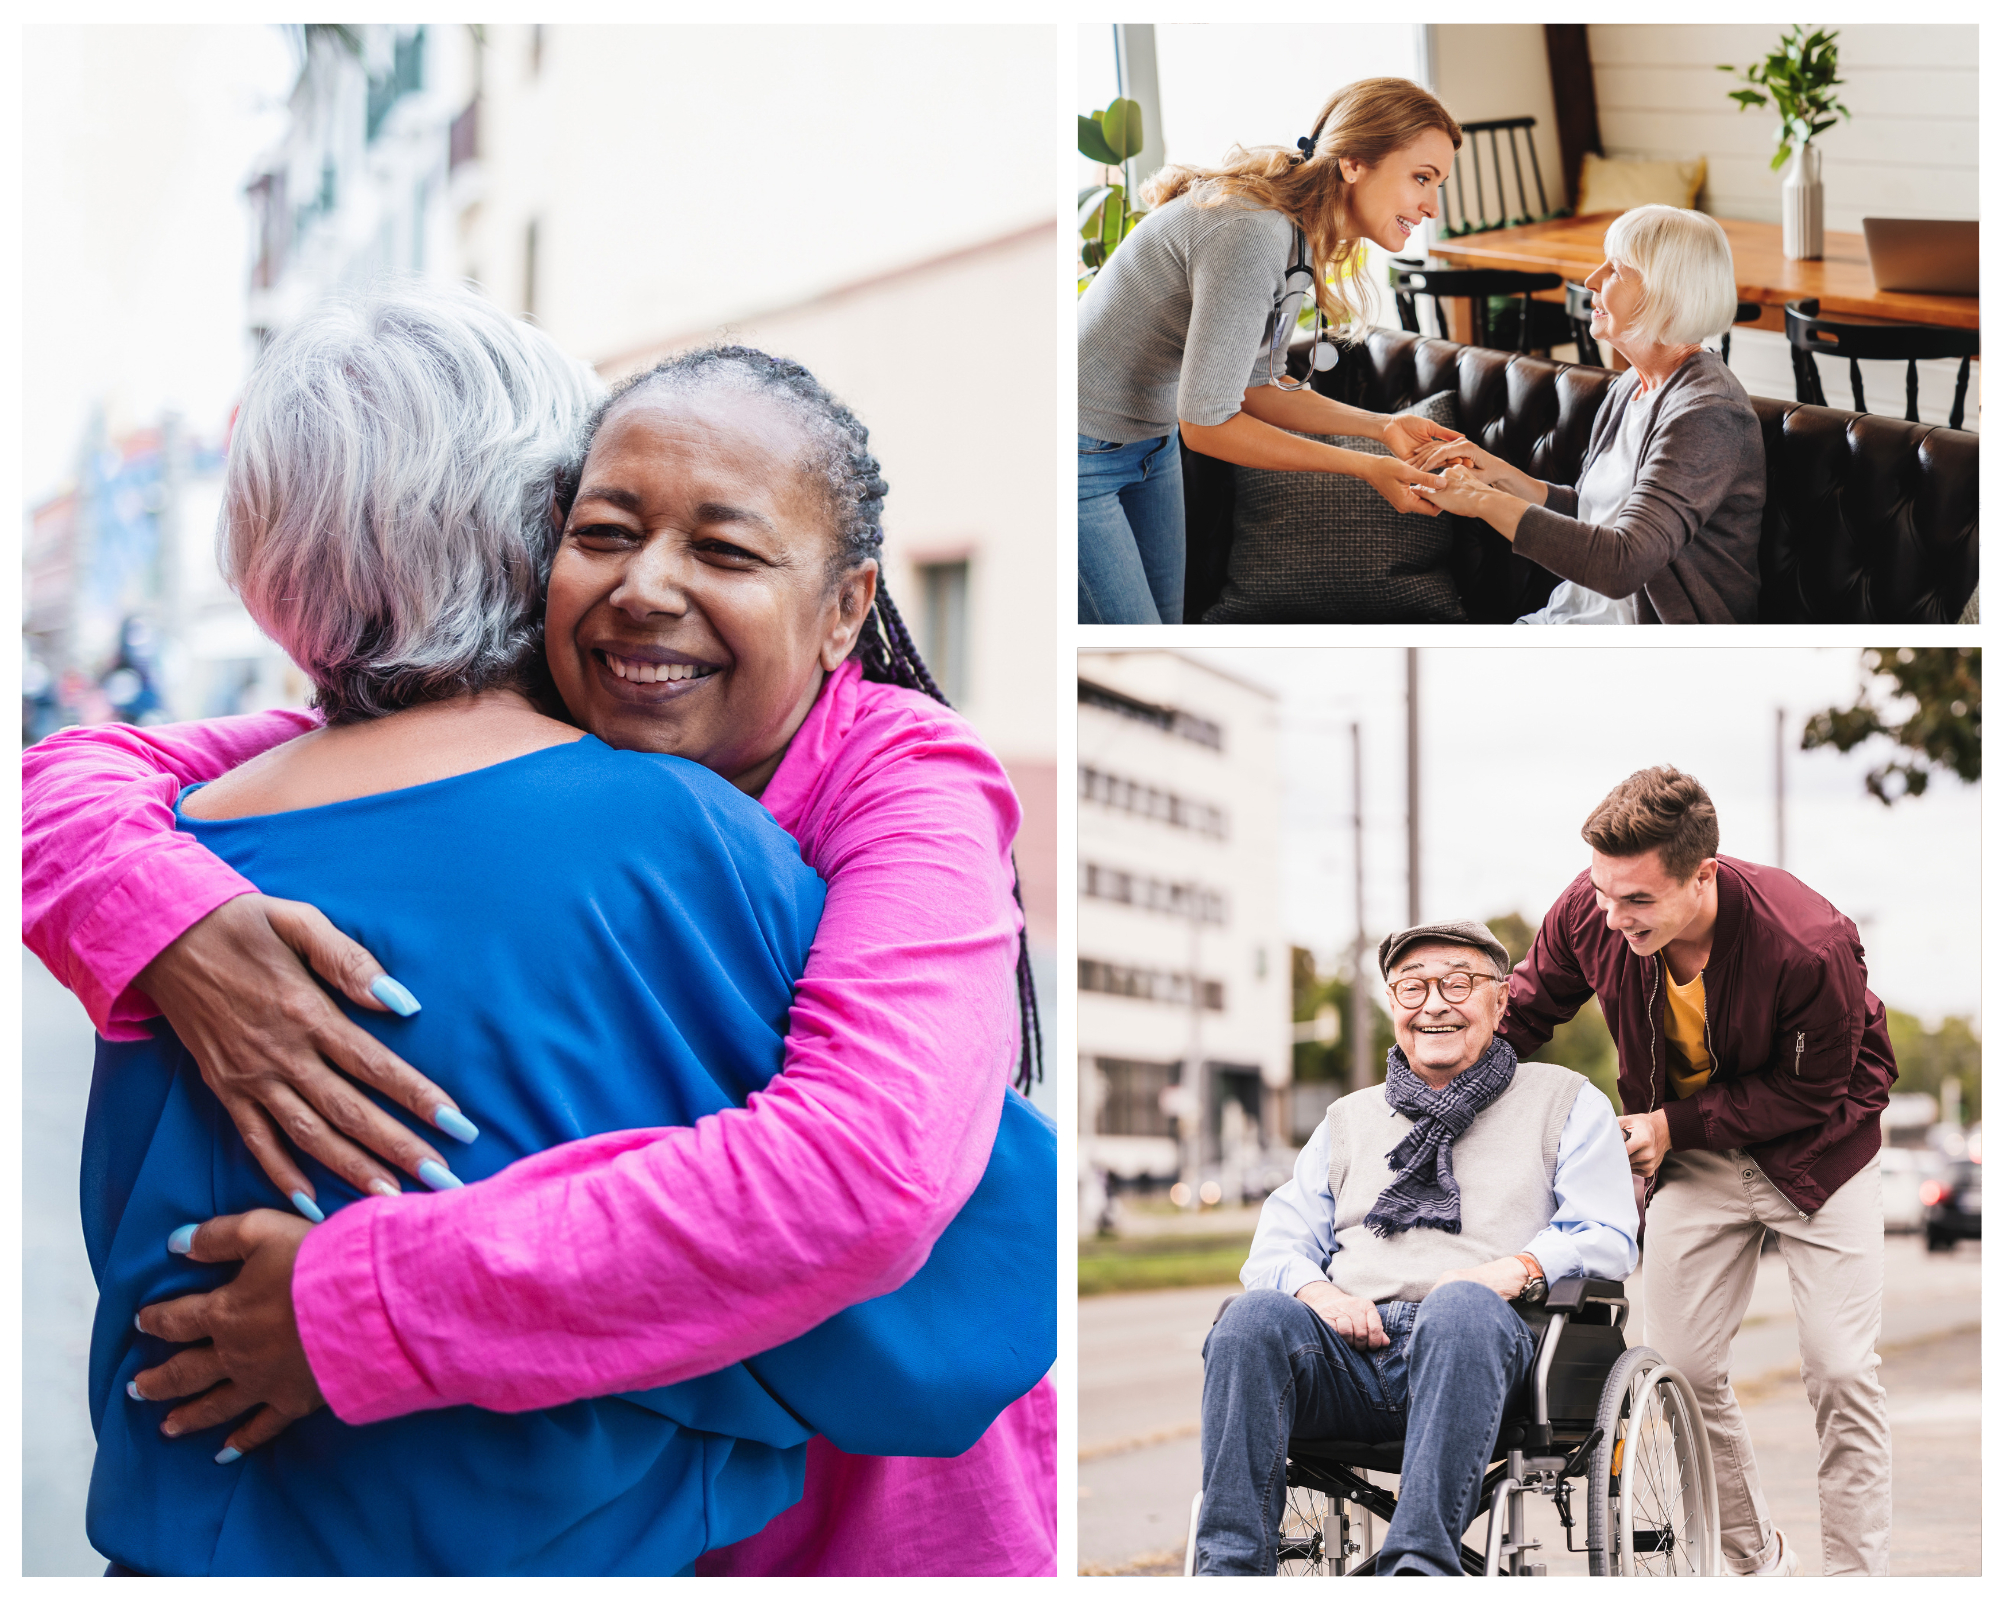 The community care program might help you